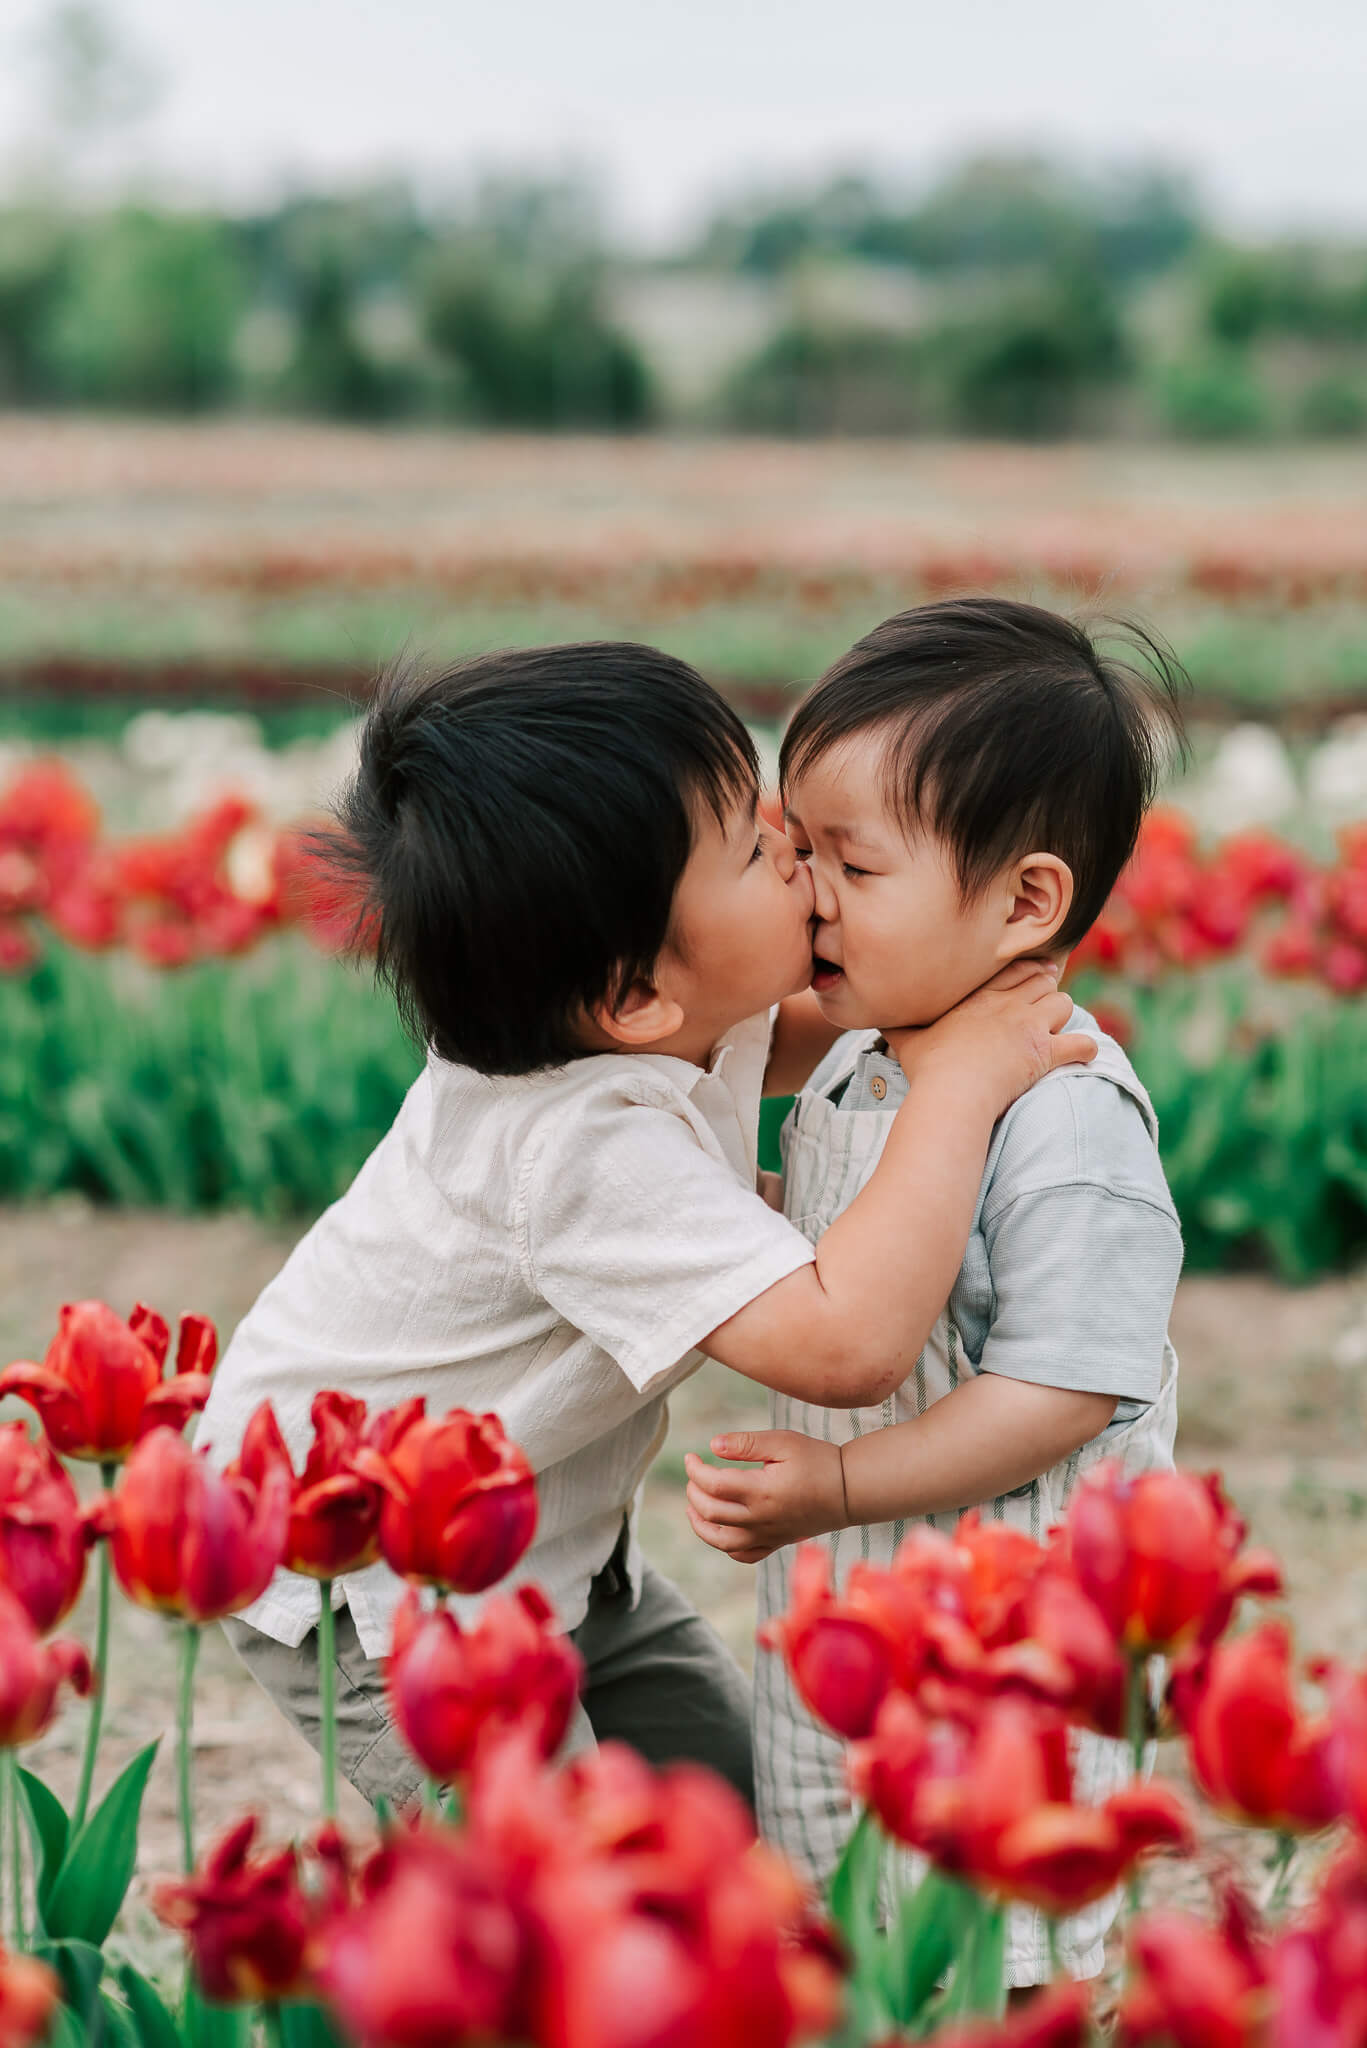 A young boy kisses the nose of his toddler brother while in a flower garden